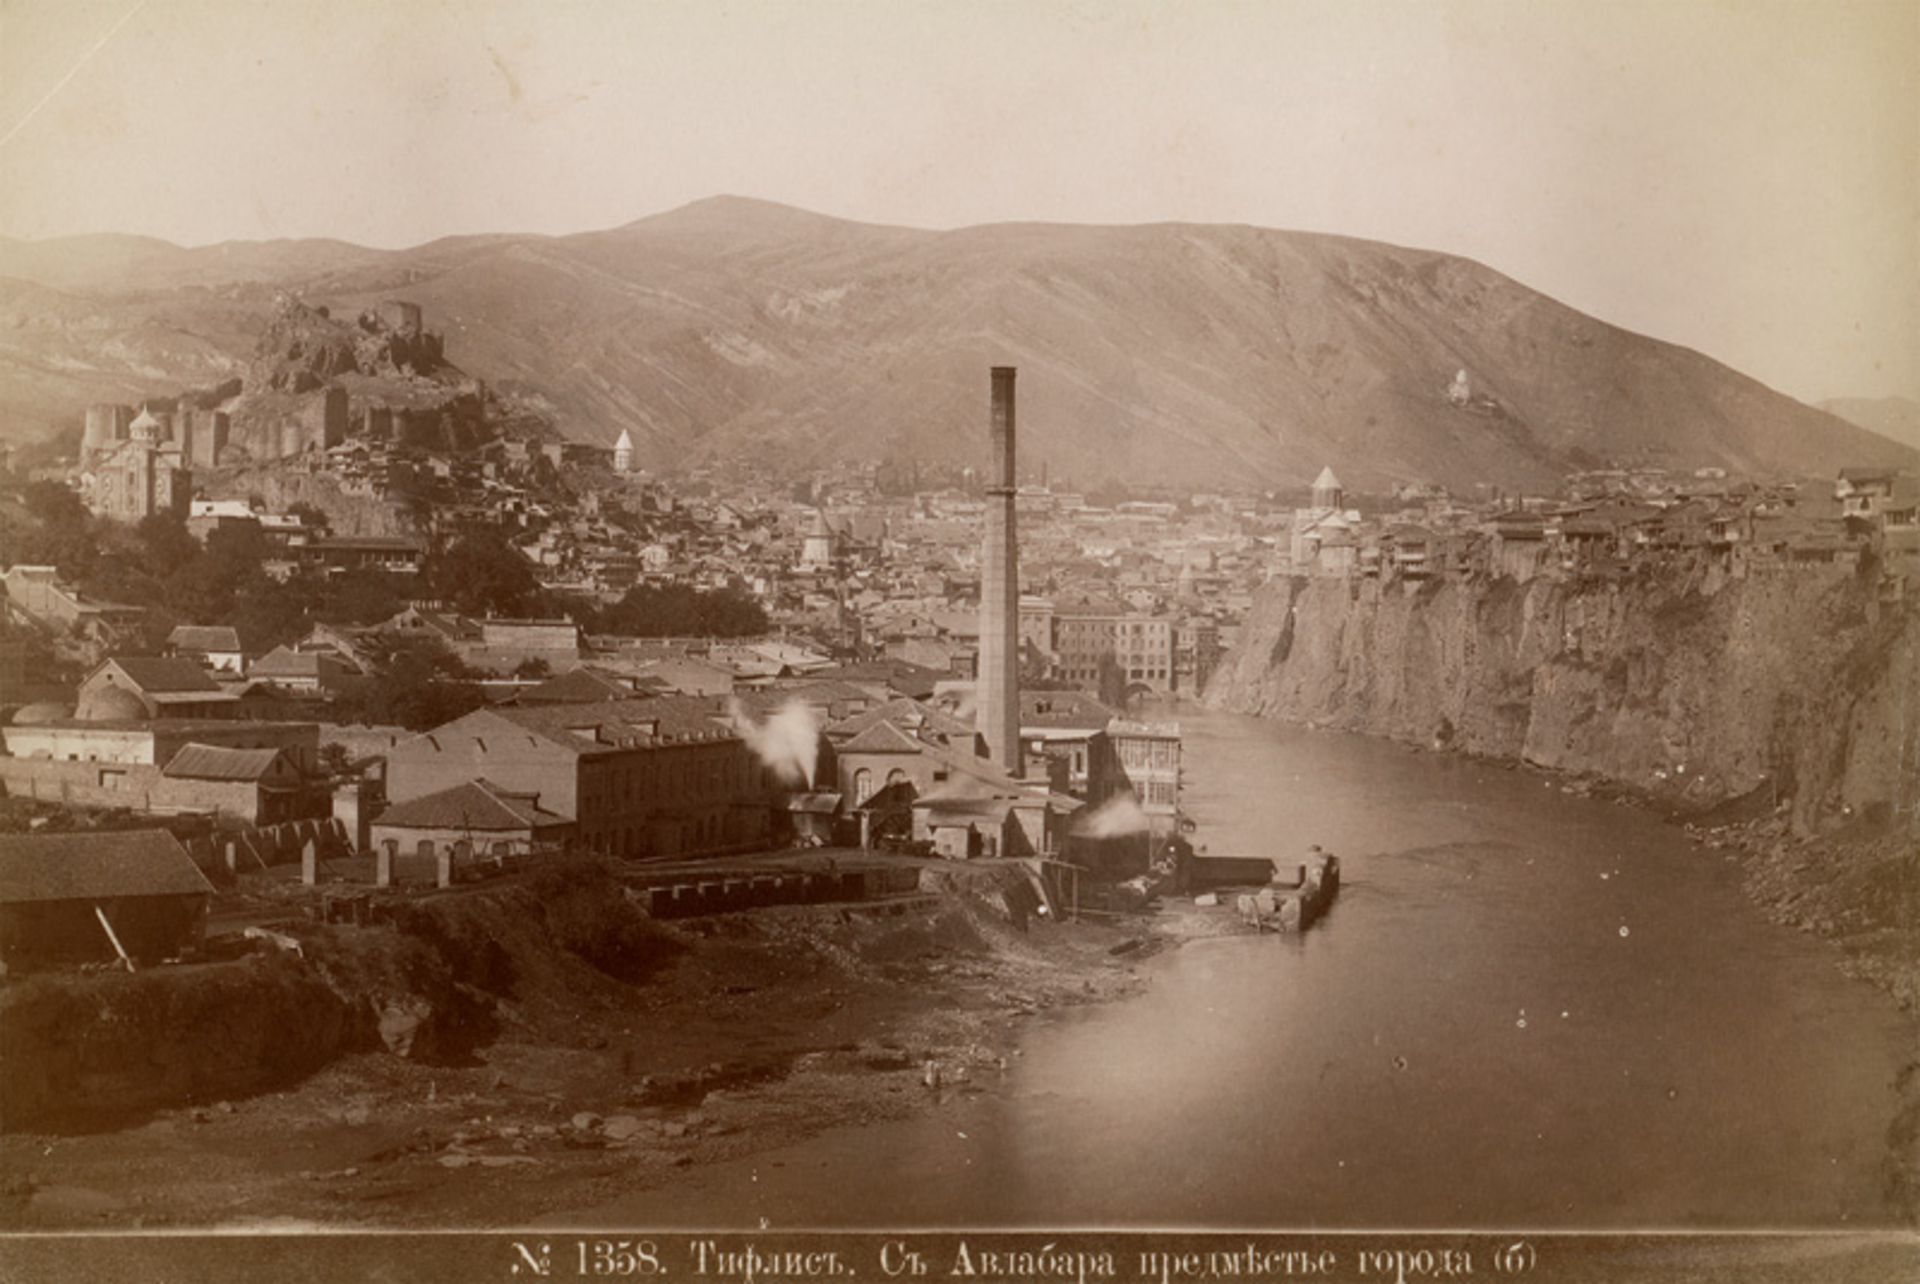 Ermakov, Dimitri N. and Unknown: Landscapes of Tiflis and surroundings